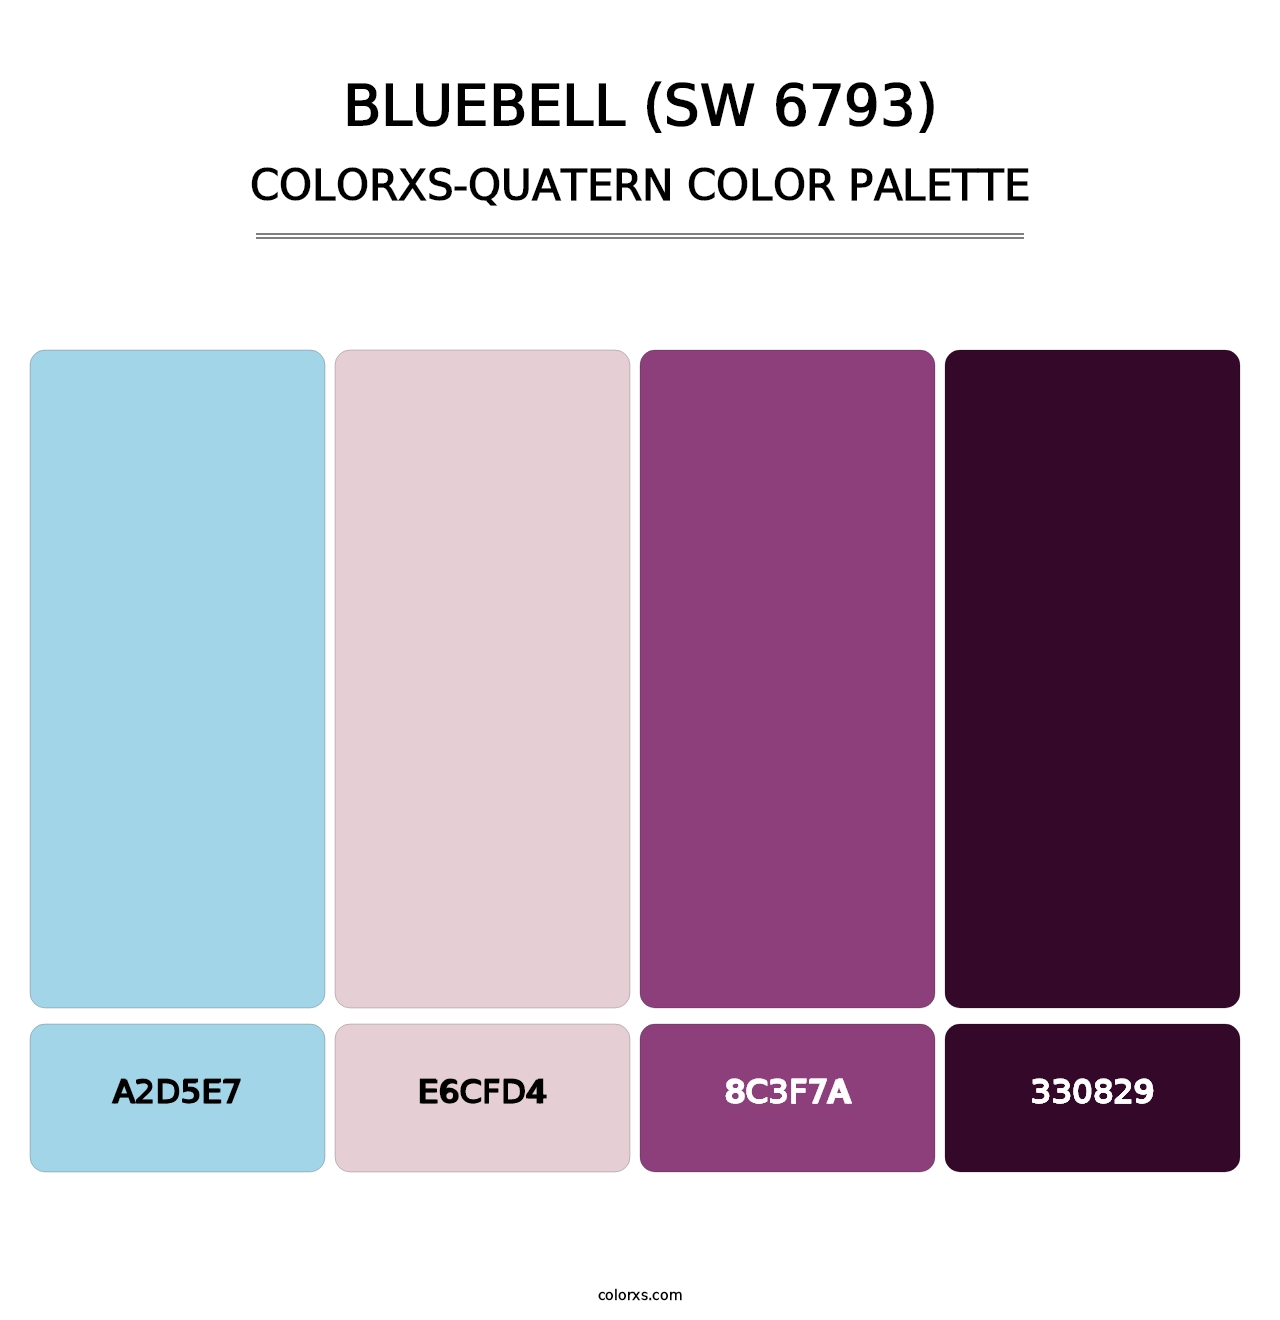 Bluebell (SW 6793) - Colorxs Quatern Palette